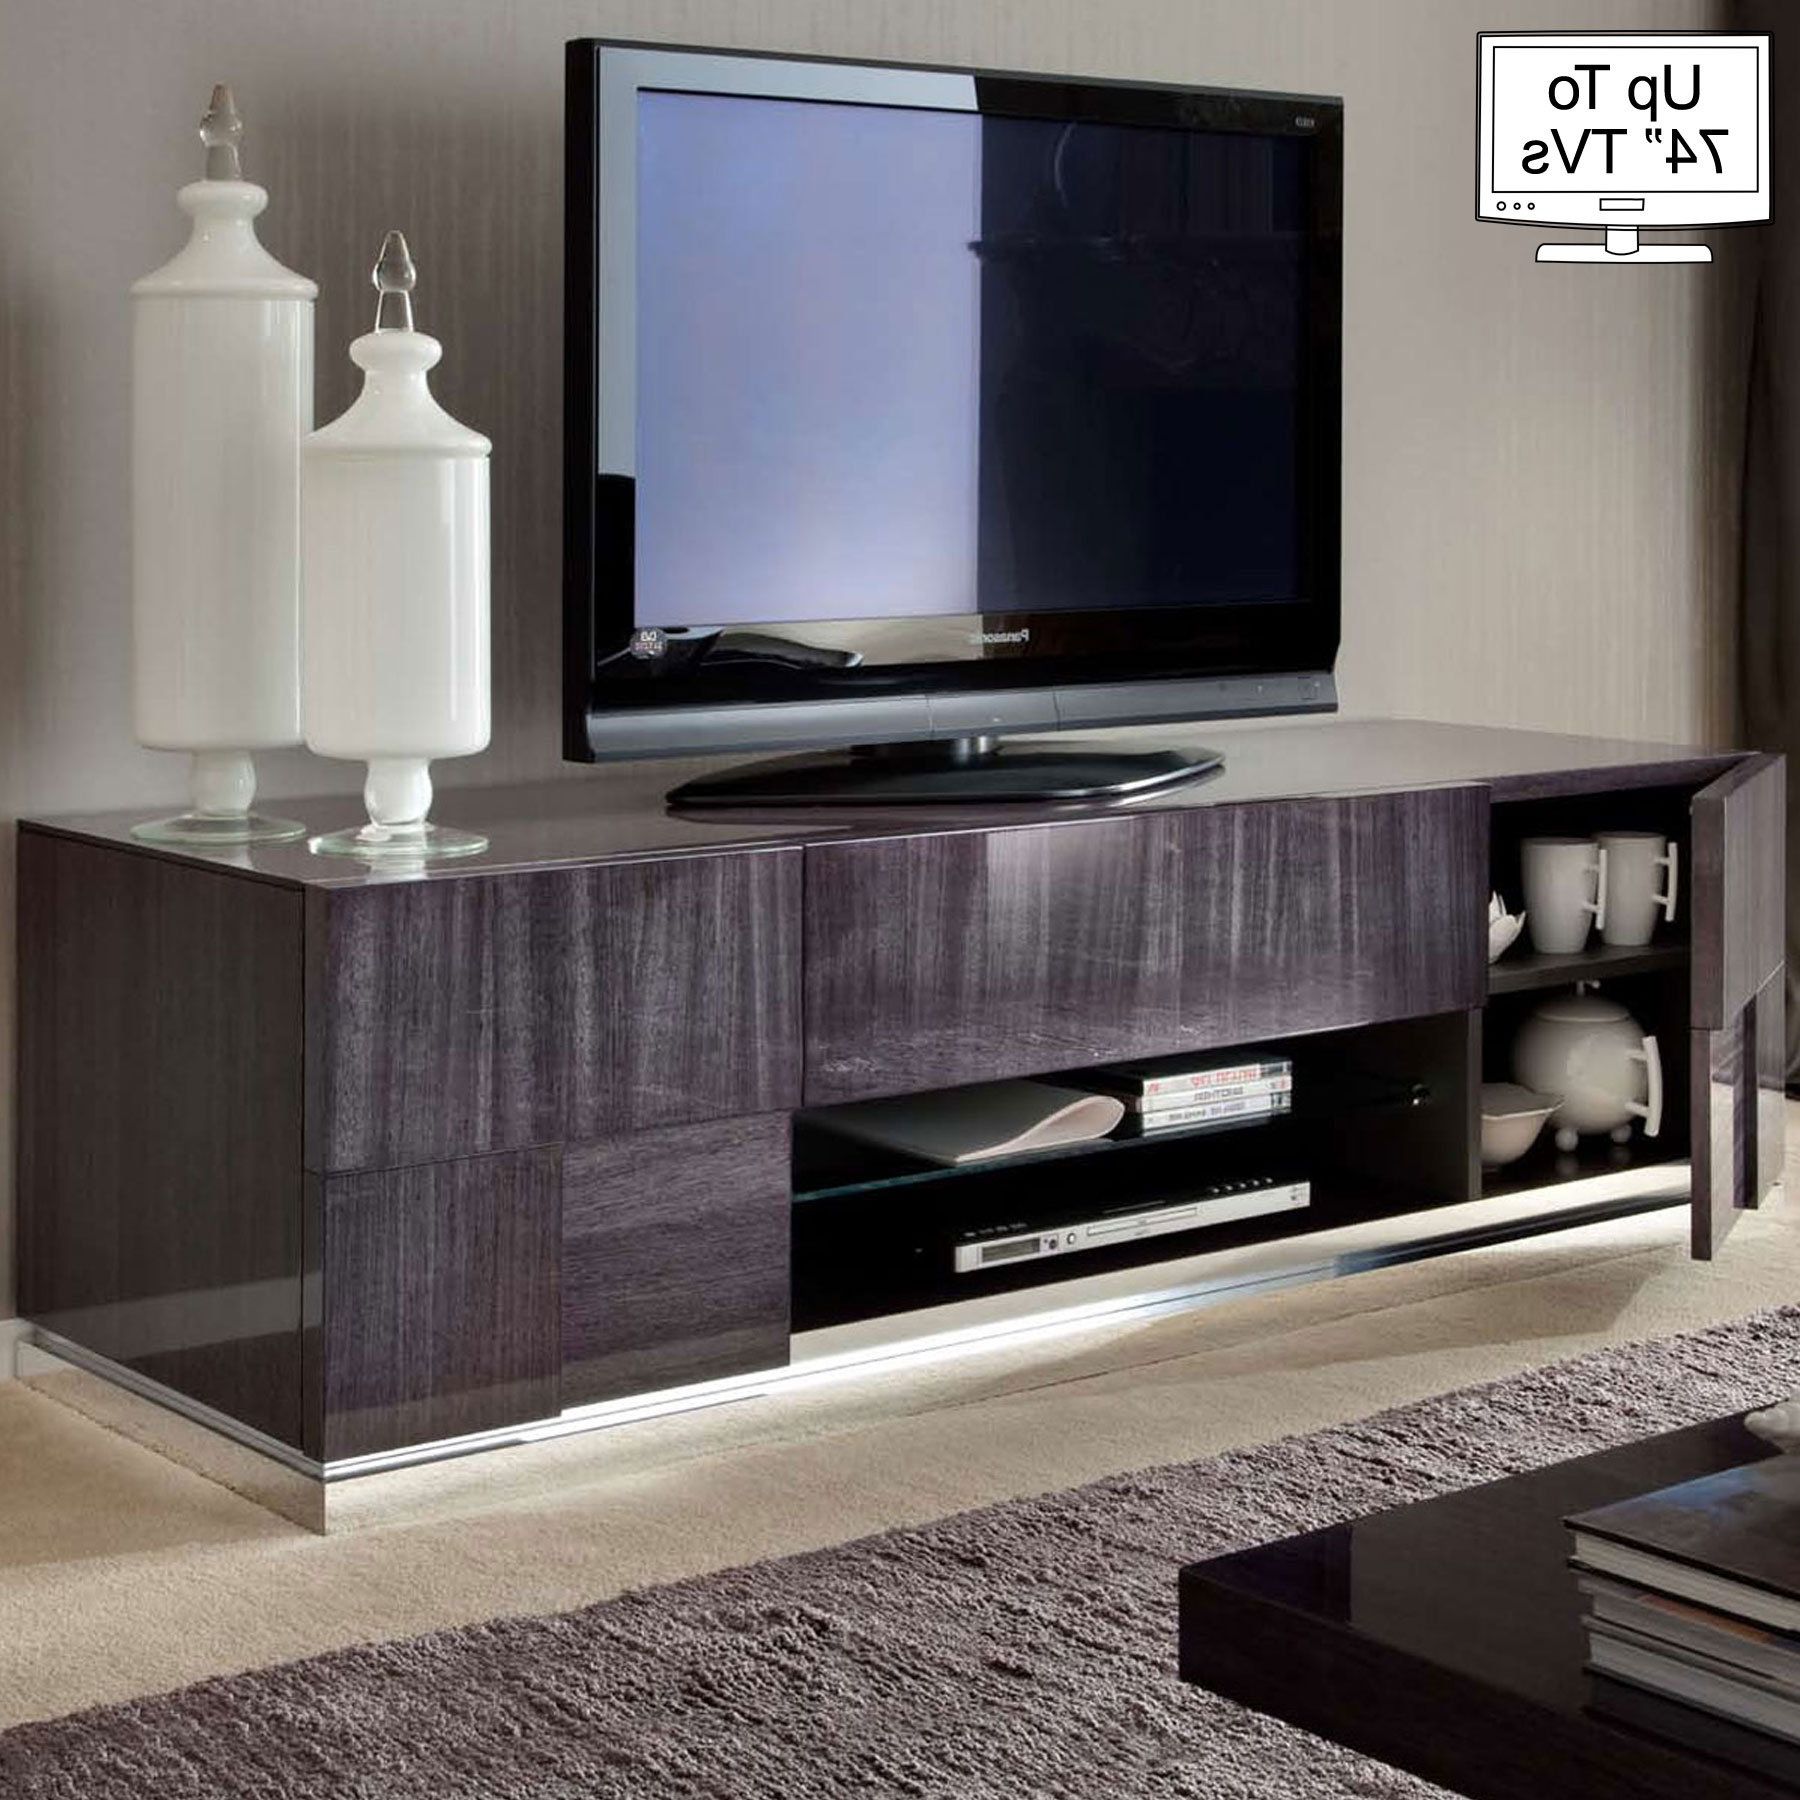 Monza High Gloss Tv Stand For Up To 74" Tvs In Cafe Tv Stands With Storage (View 16 of 20)